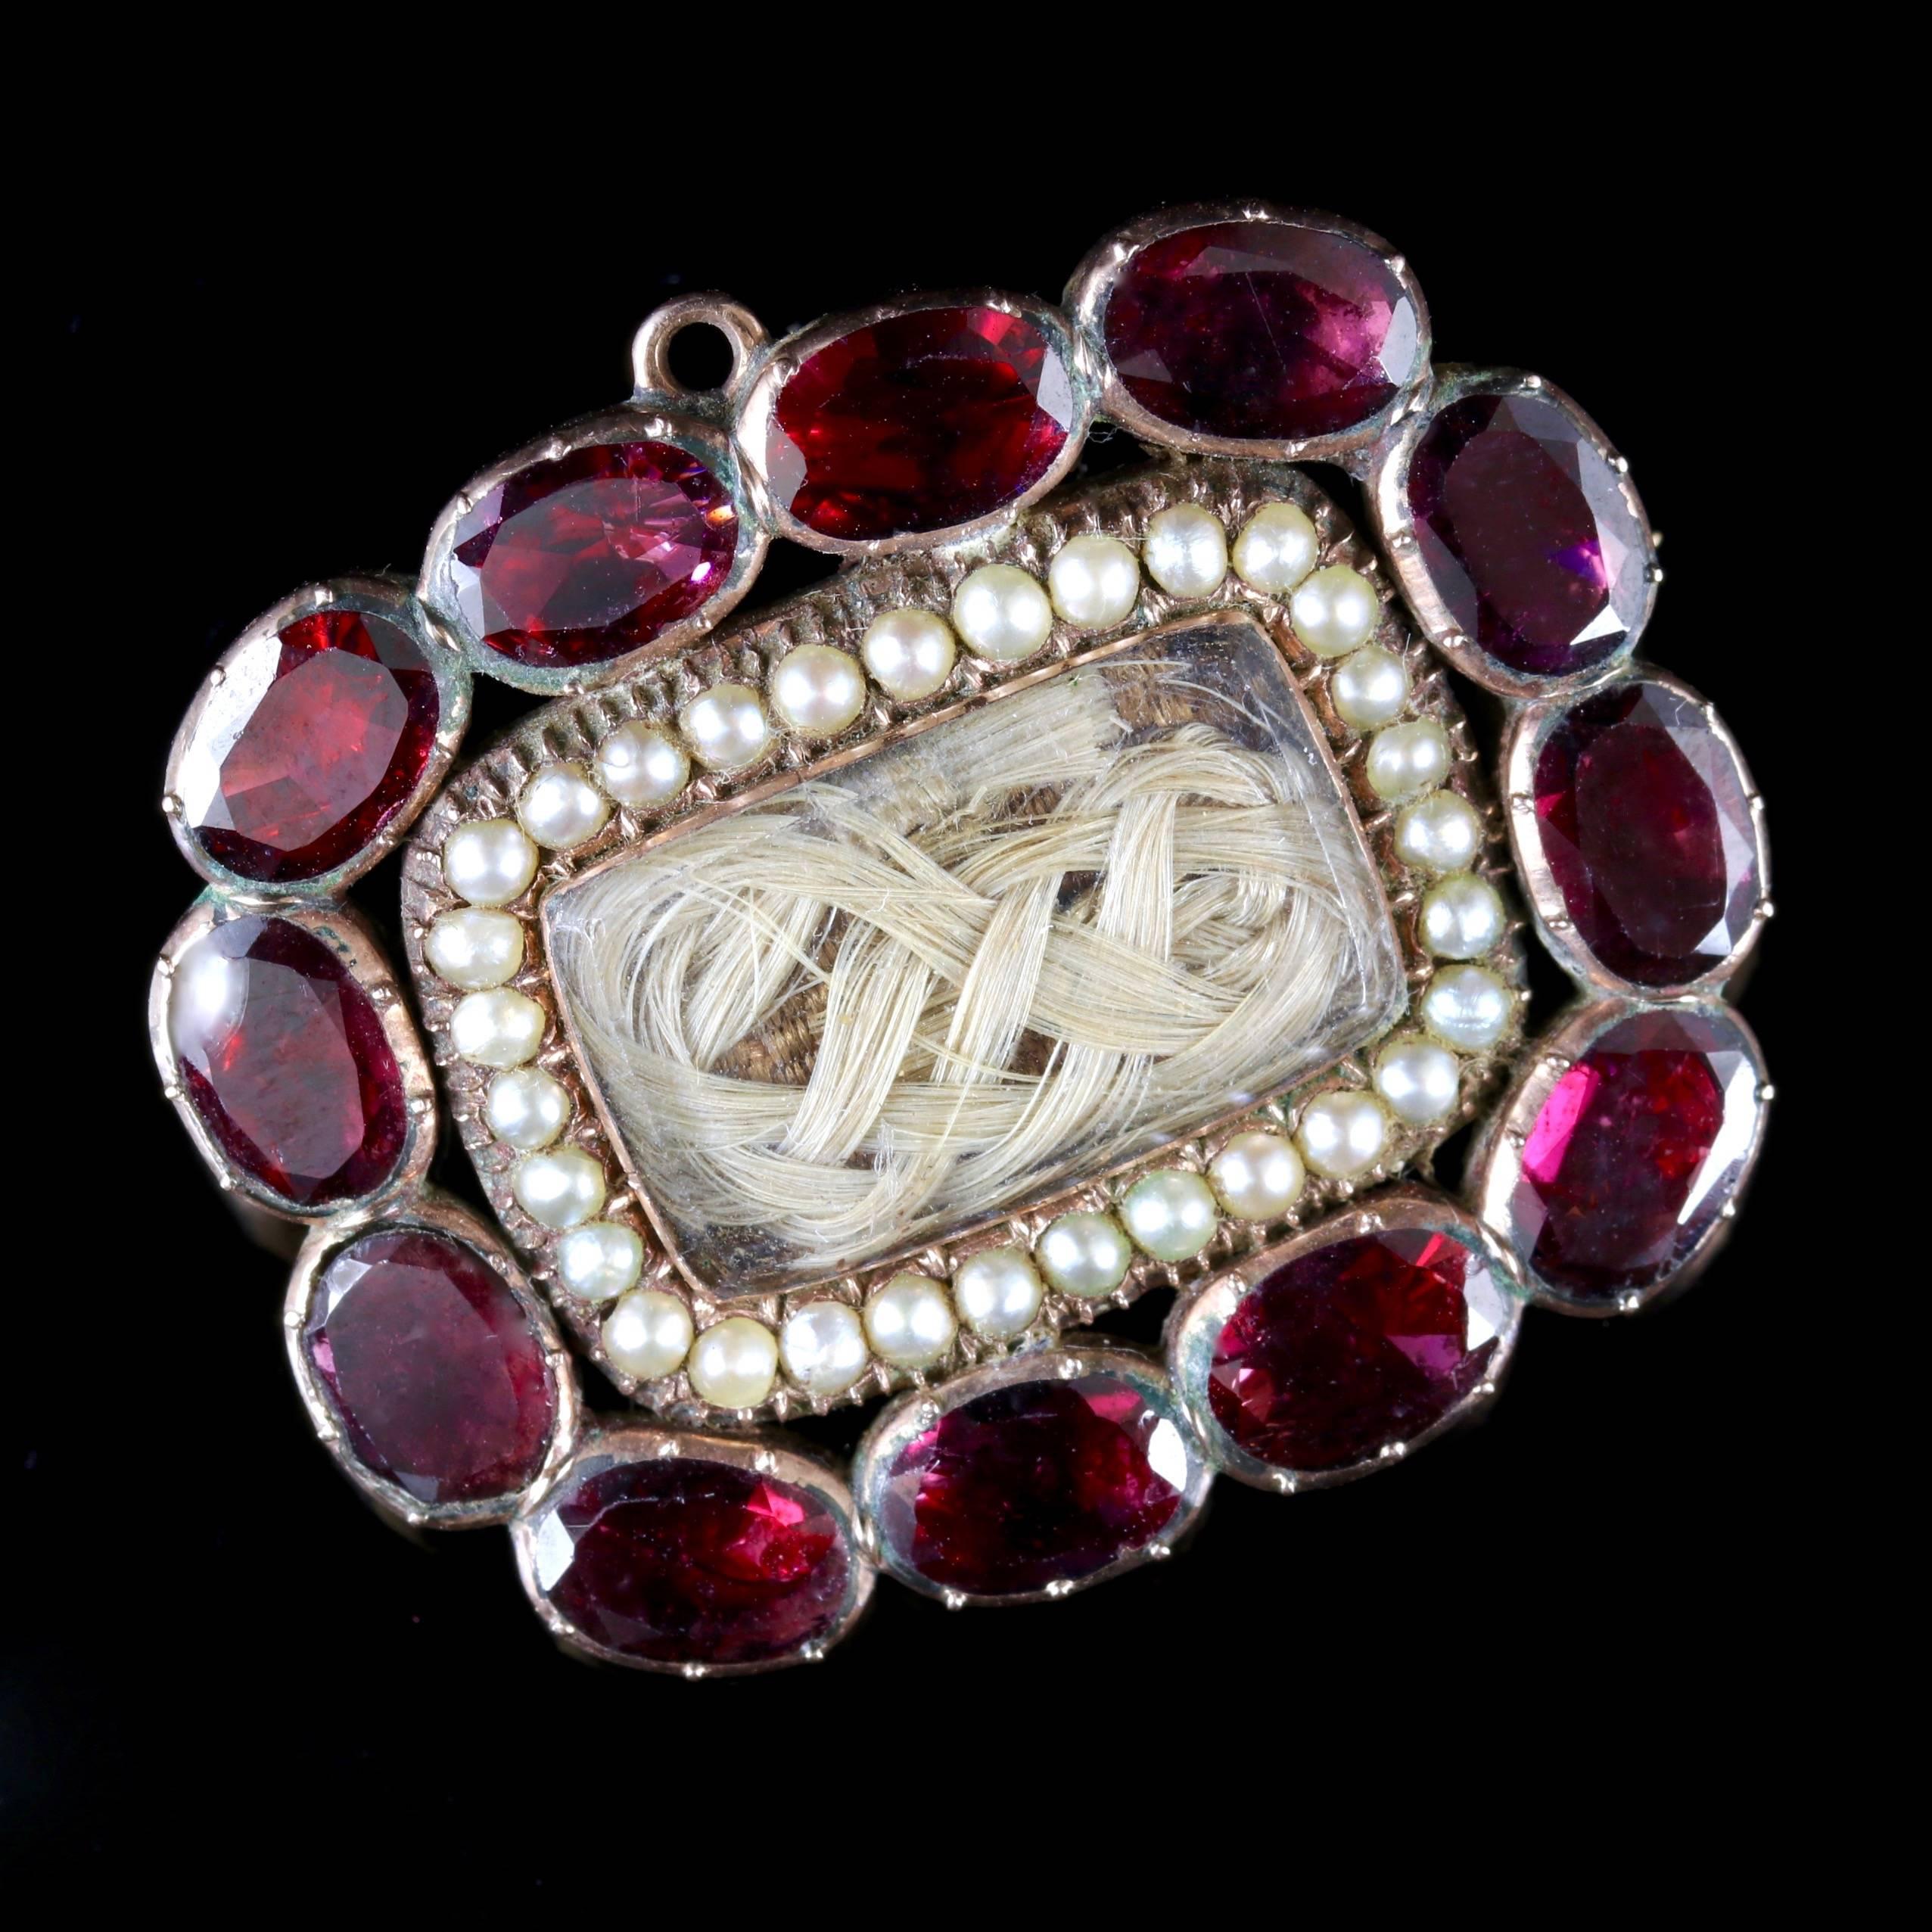 This Georgian 18ct Gold Flat cut Garnet mourning brooch is Circa 1800.

Due to its age, Georgian jewellery is quite rare, with some pieces almost three hundred years old. From 1714 until 1837 four King Georges and a short-lived William gave rise to